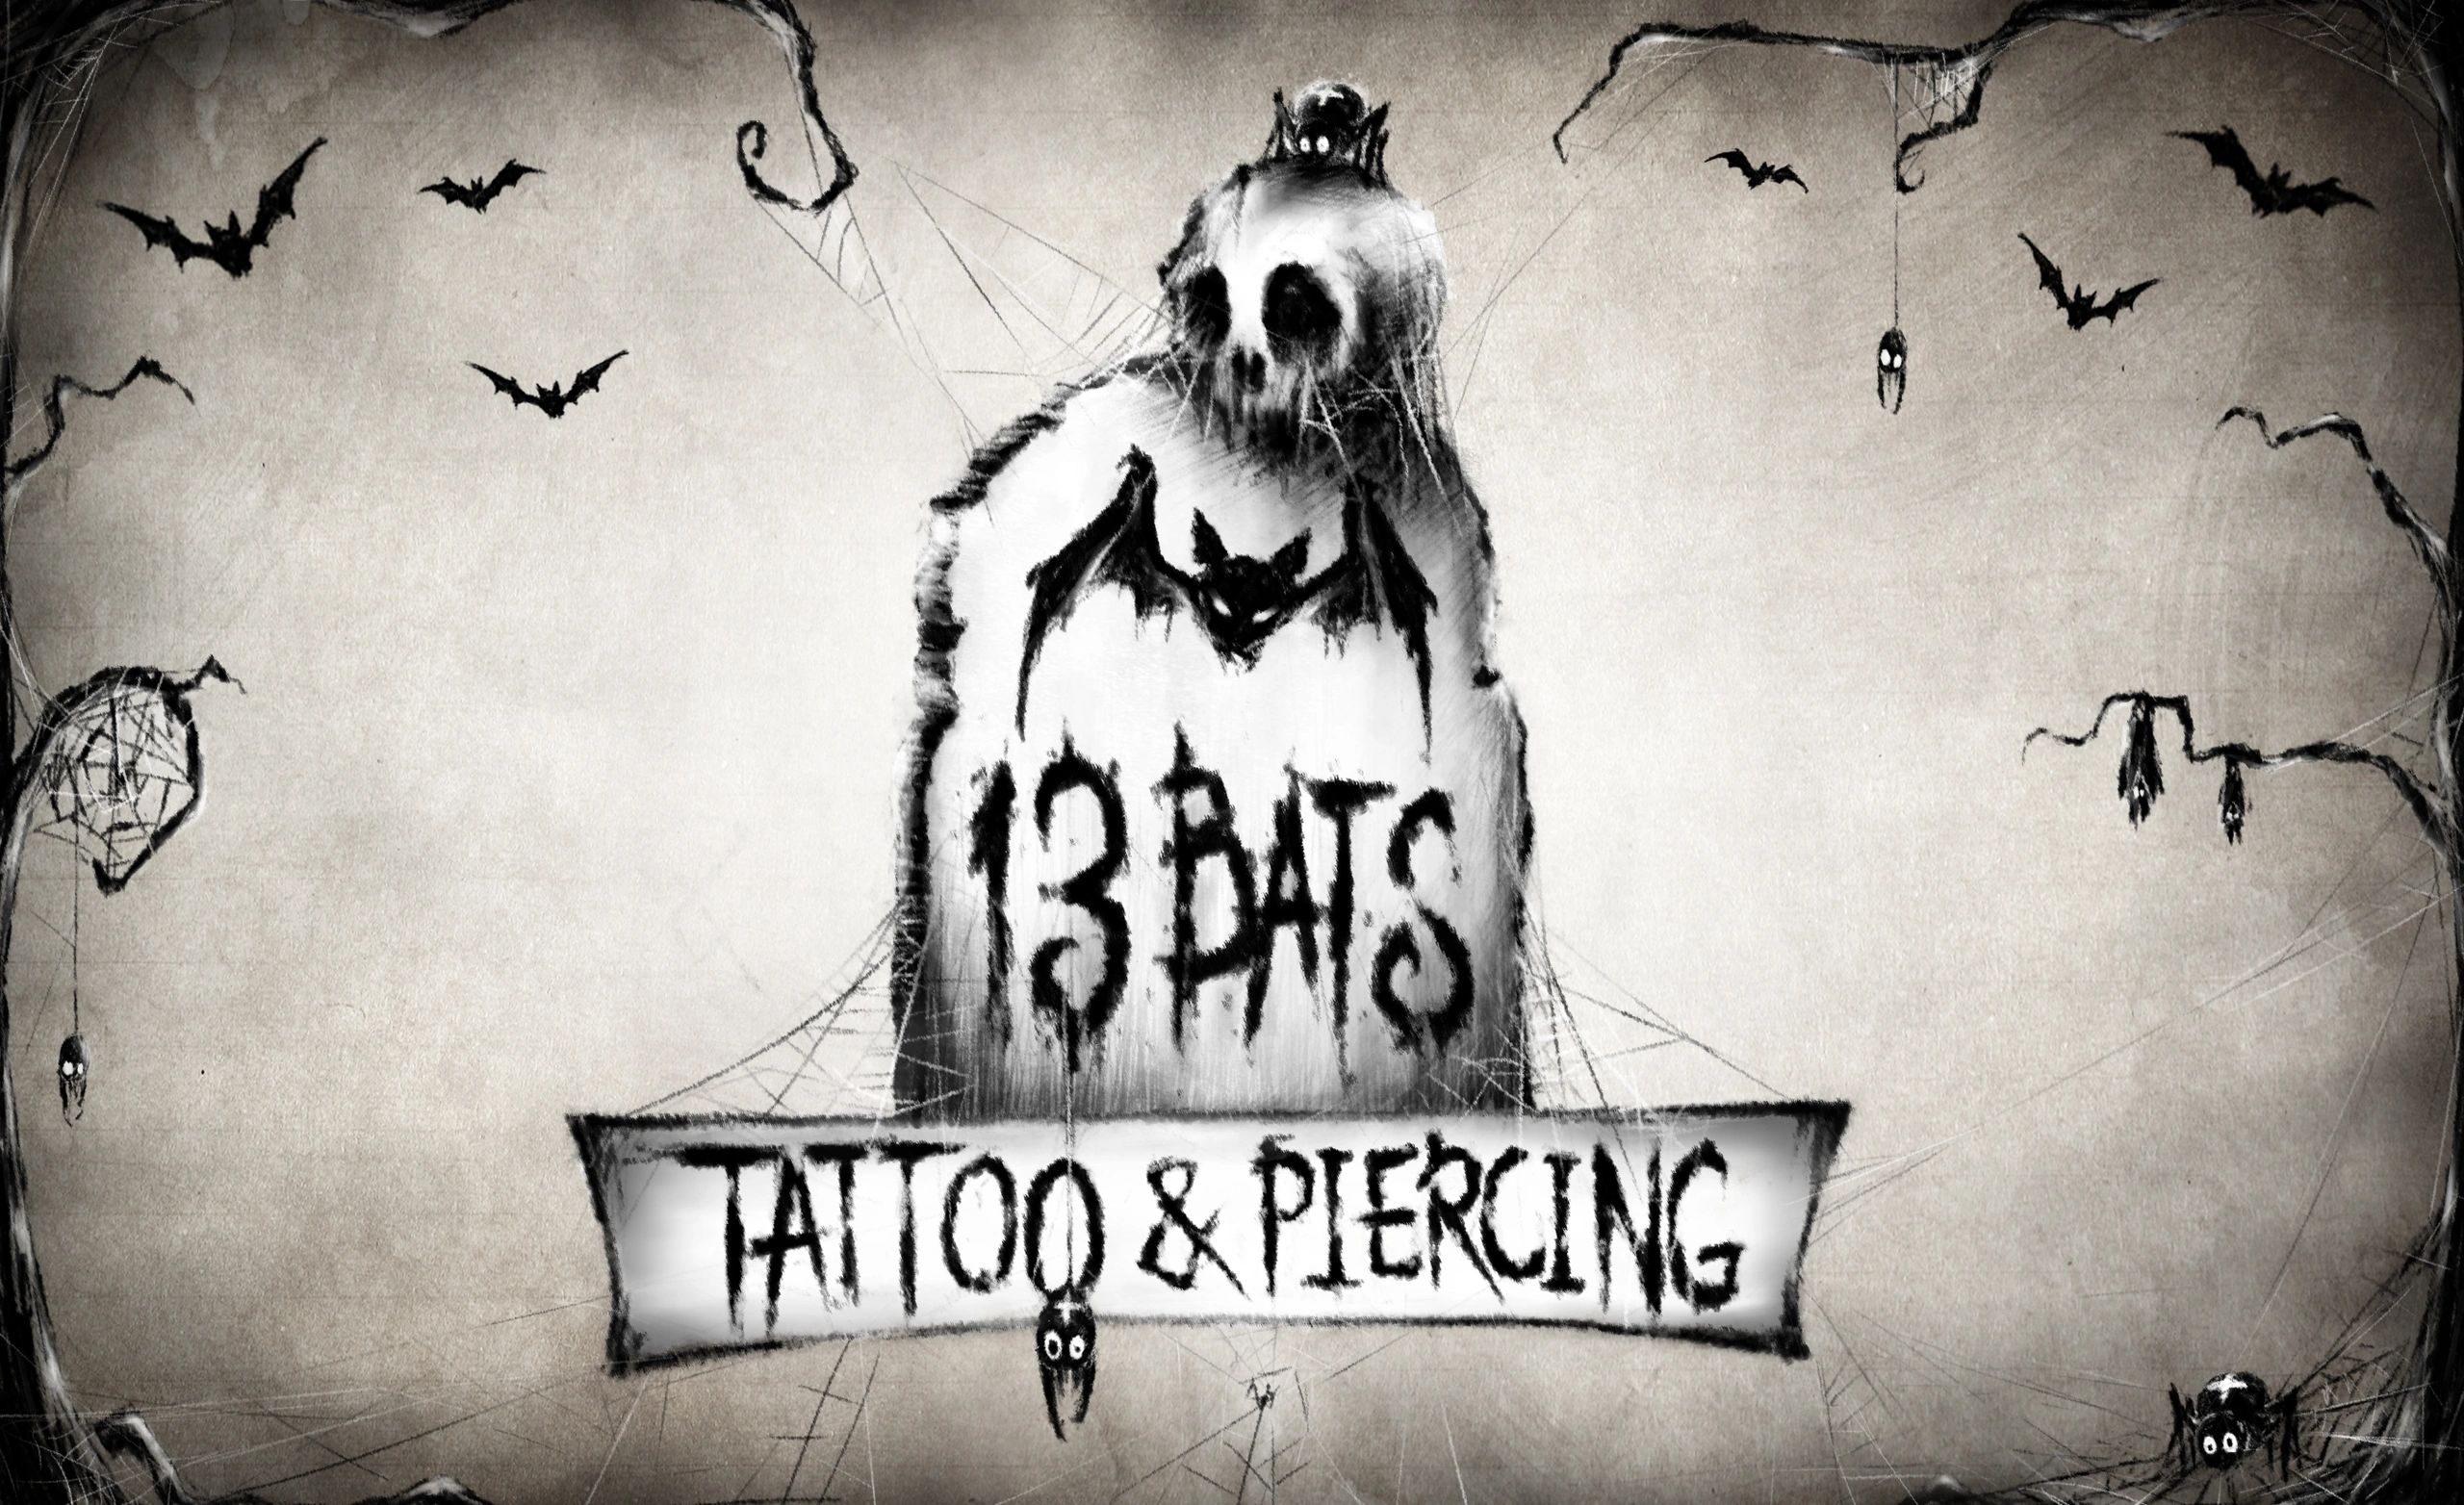 13 BATS TATTOO AND PIERCING LOGO WITH BATS AND A SKULL AND SPIDER ON A TOMBSTONE